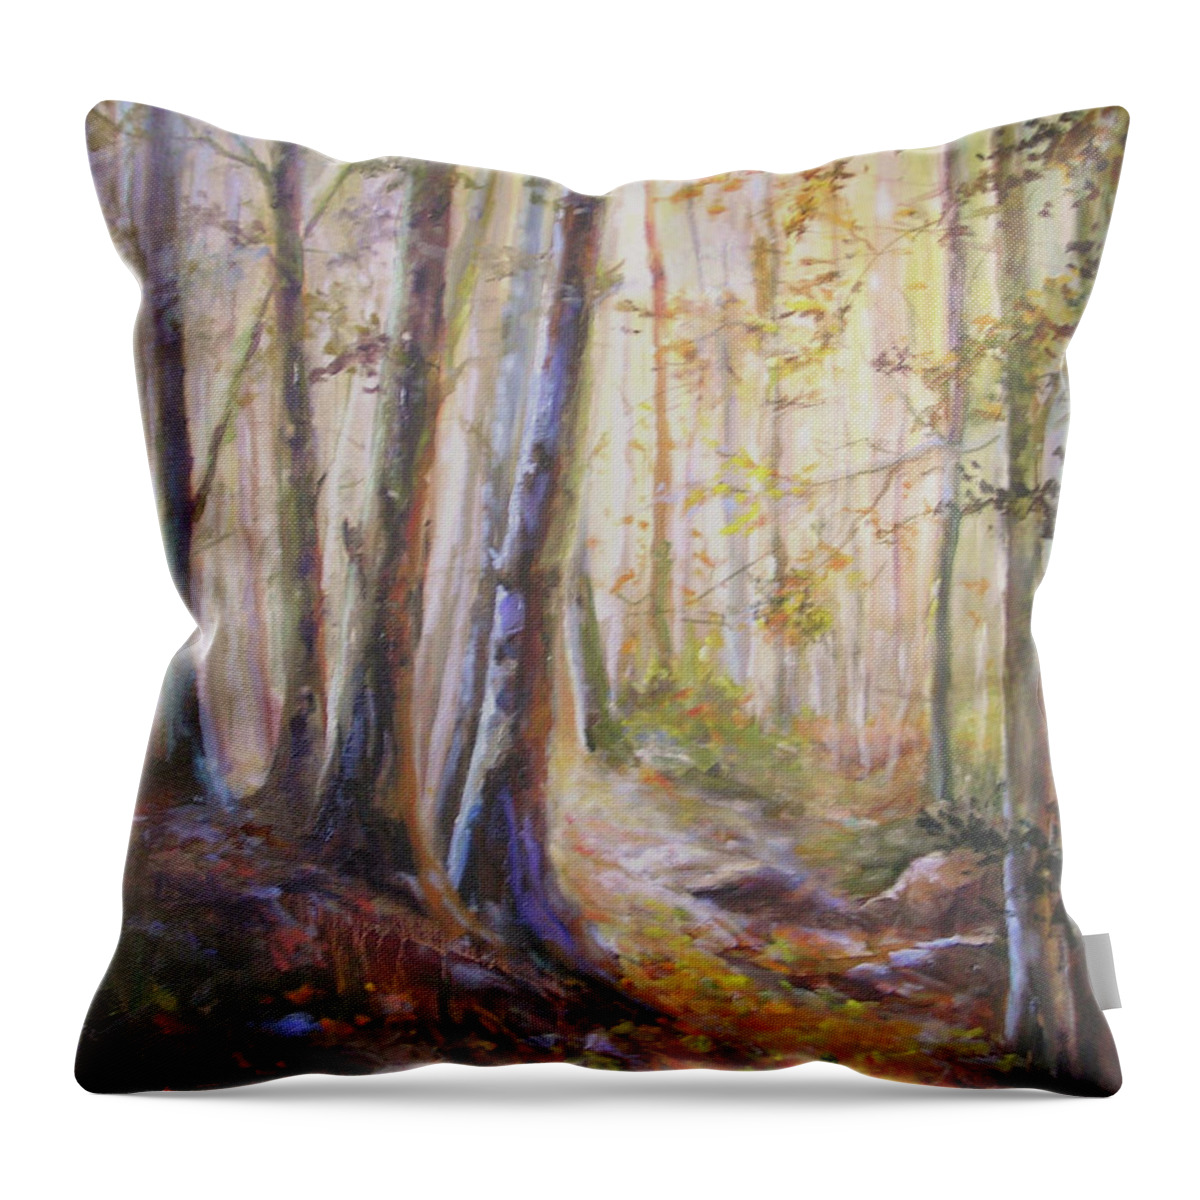 Landscape Throw Pillow featuring the painting A Walk Through the Woods #1 by Barbara Couse Wilson